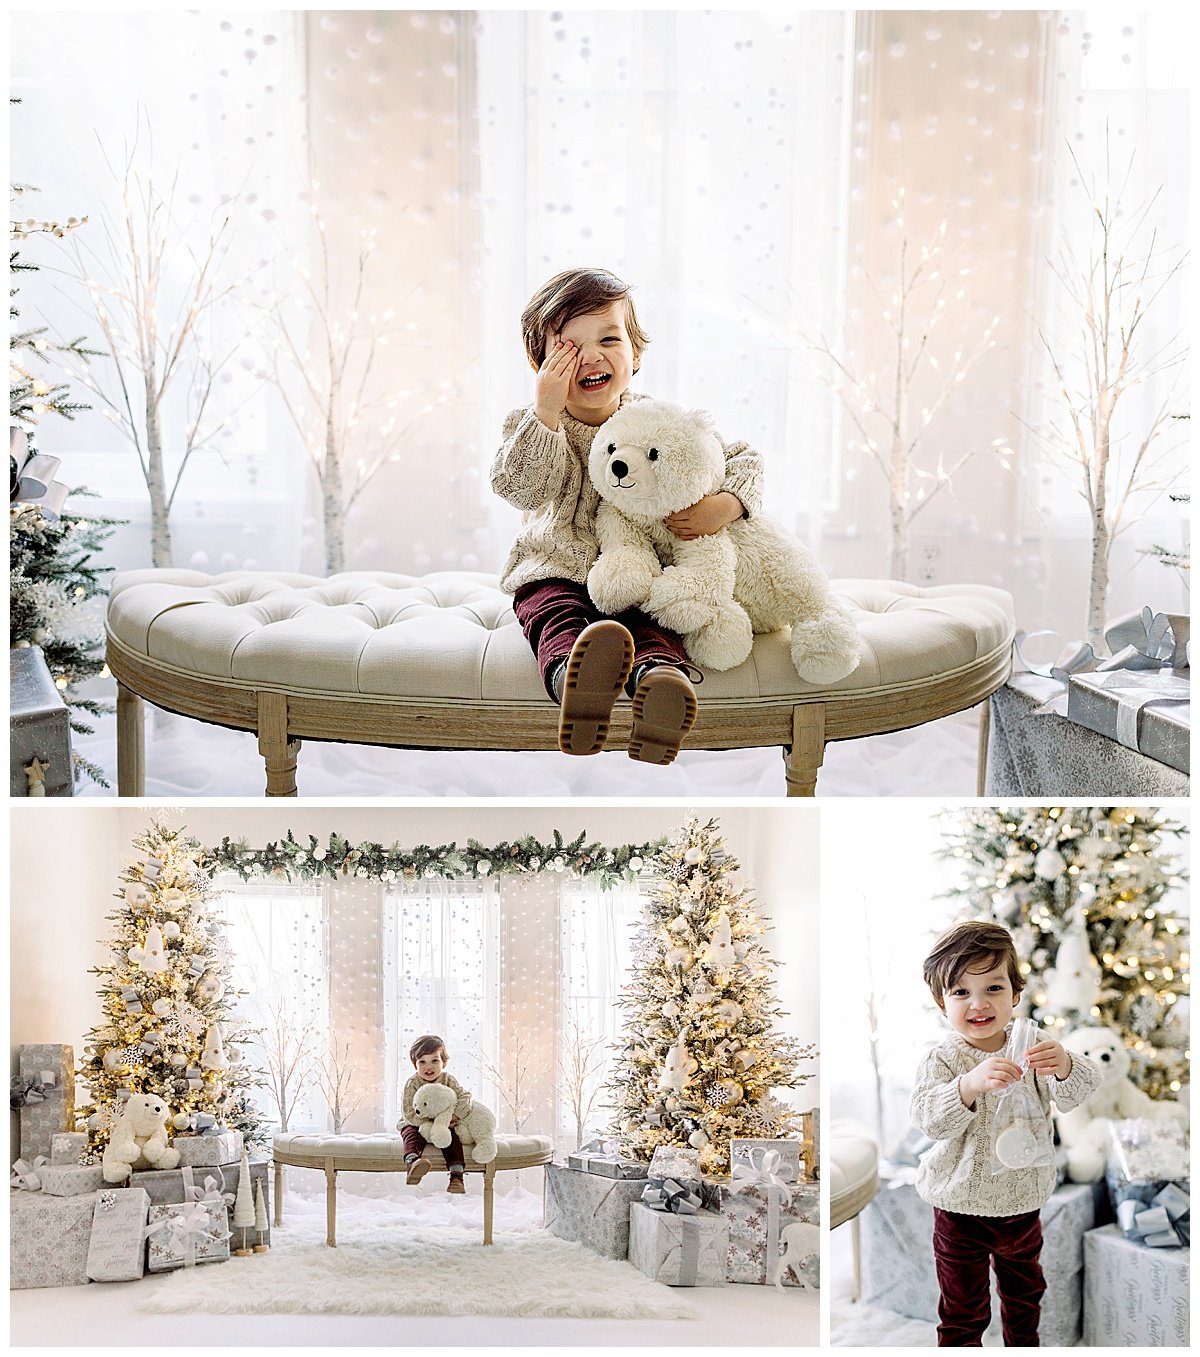 Boy on bench in front of Christmas Set